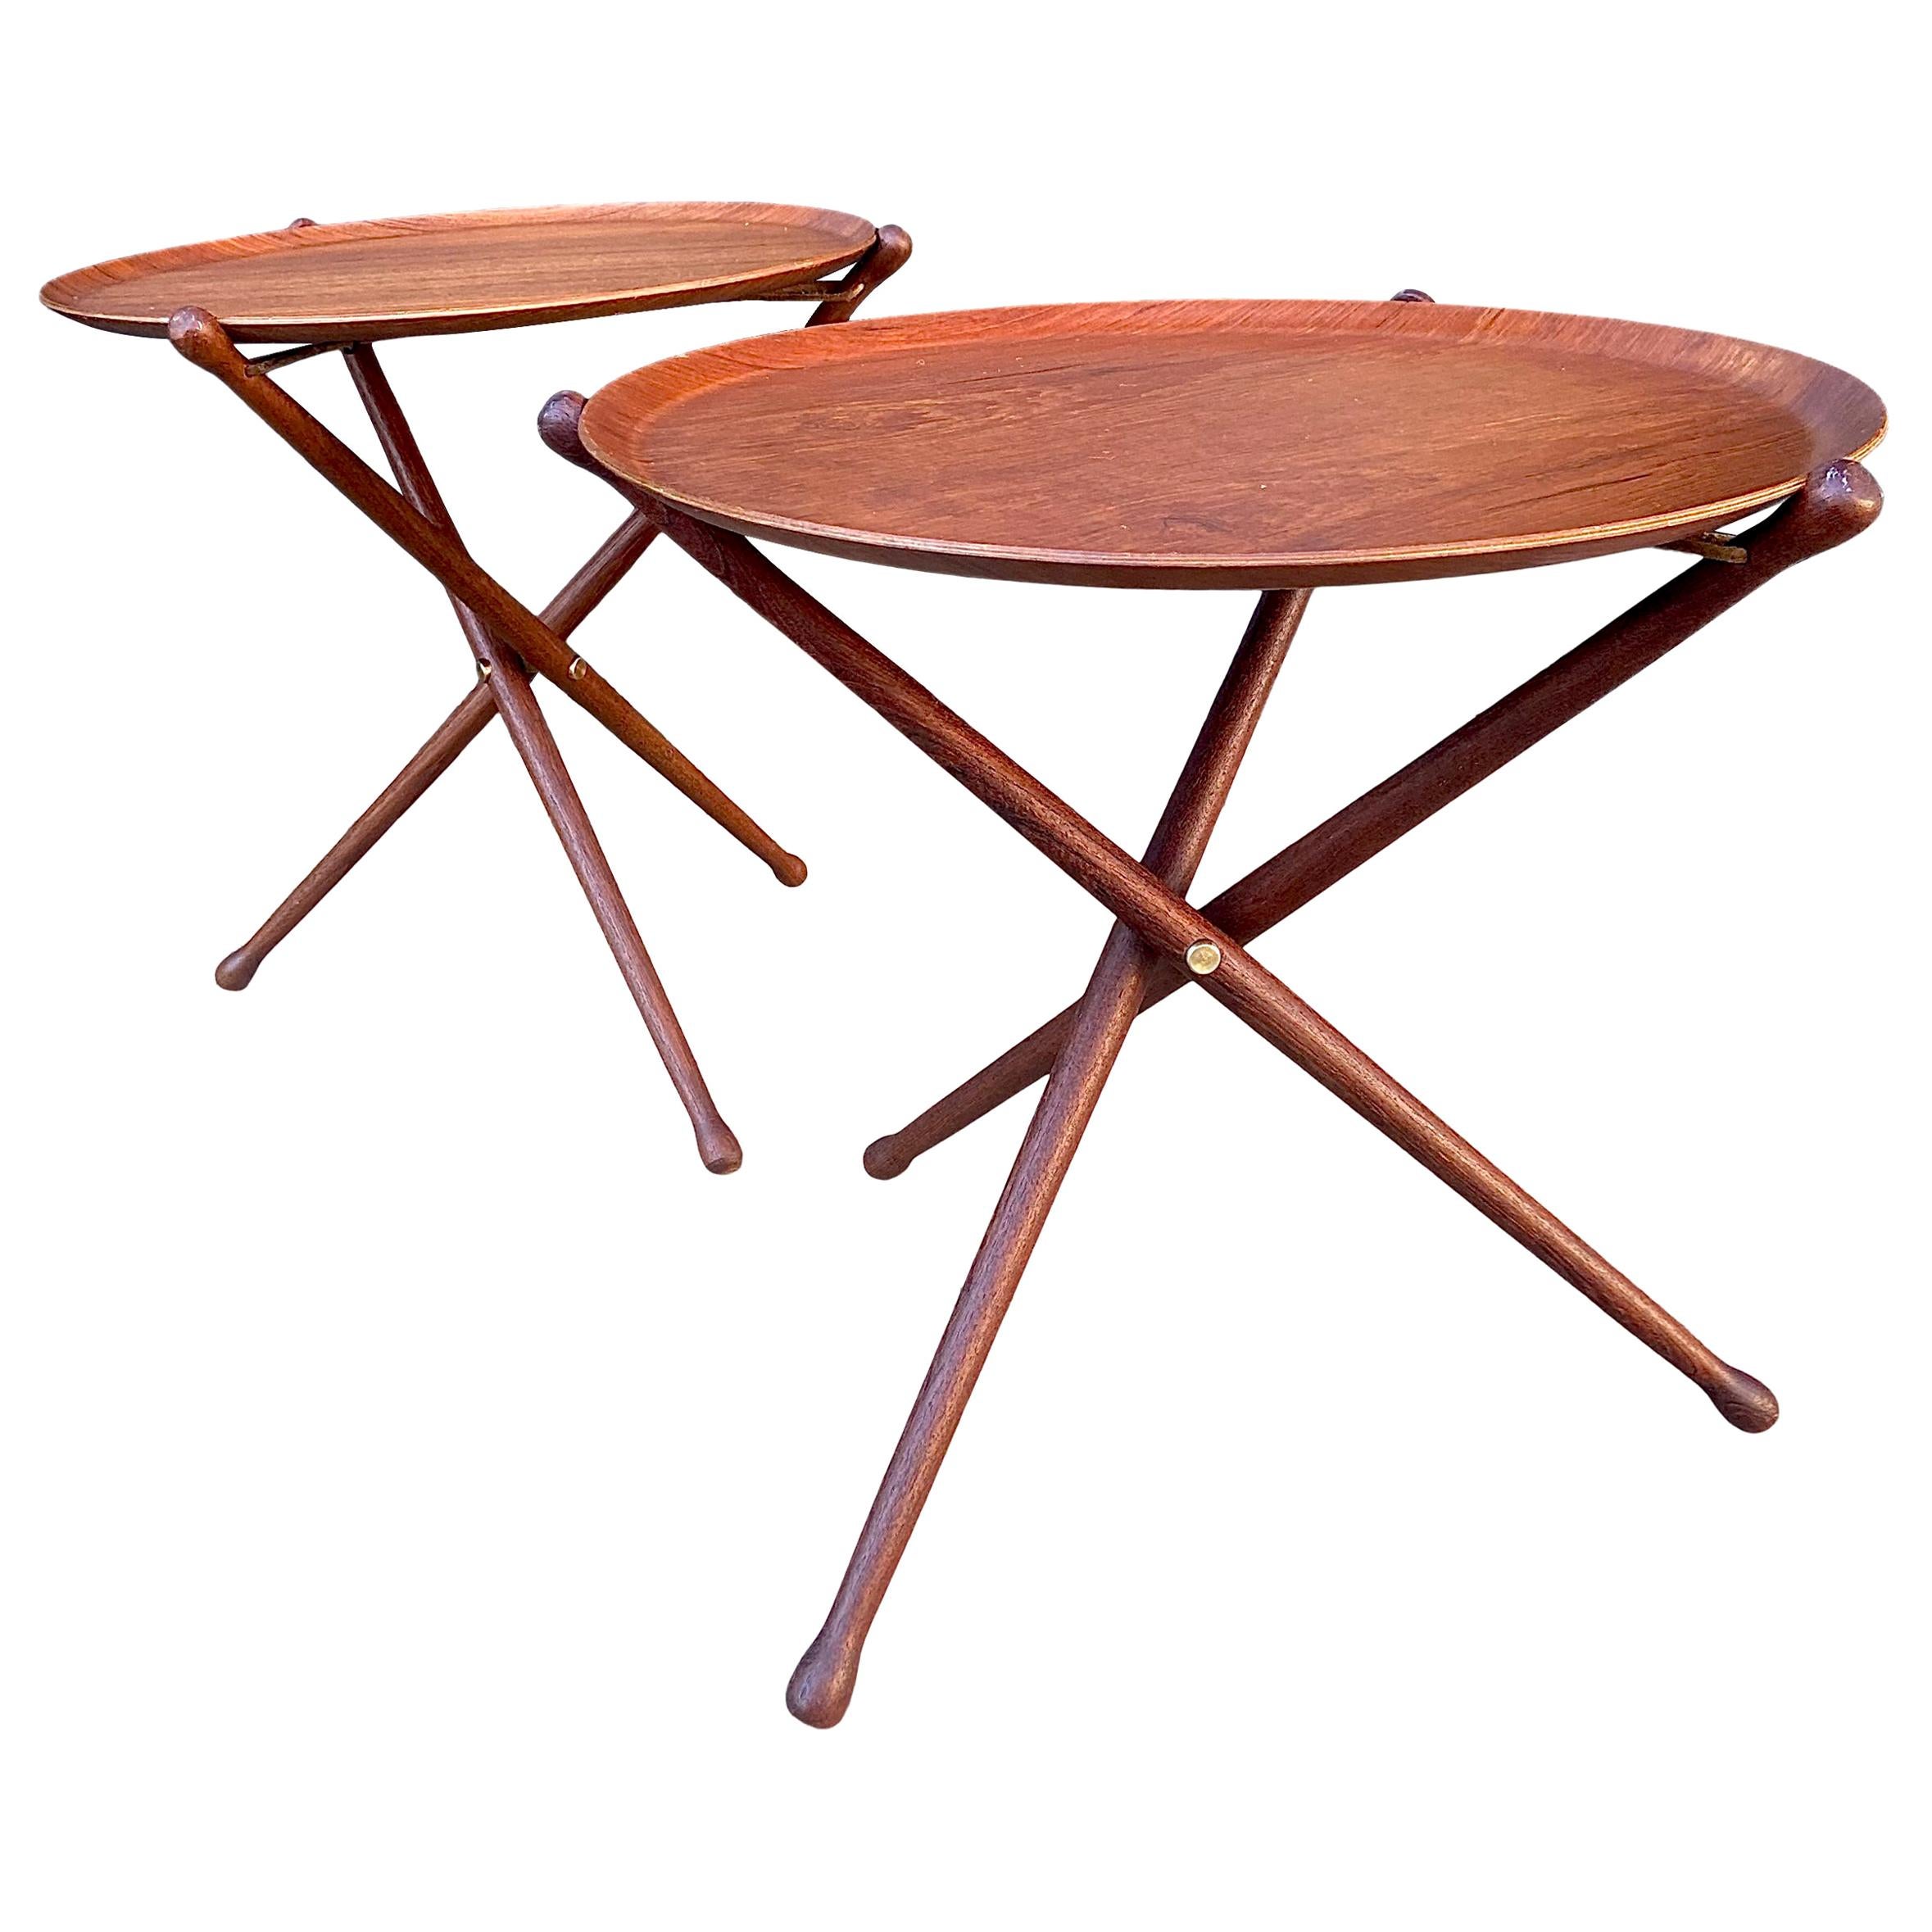 Midcentury Campaign Tray Table 
by Nils Trautner